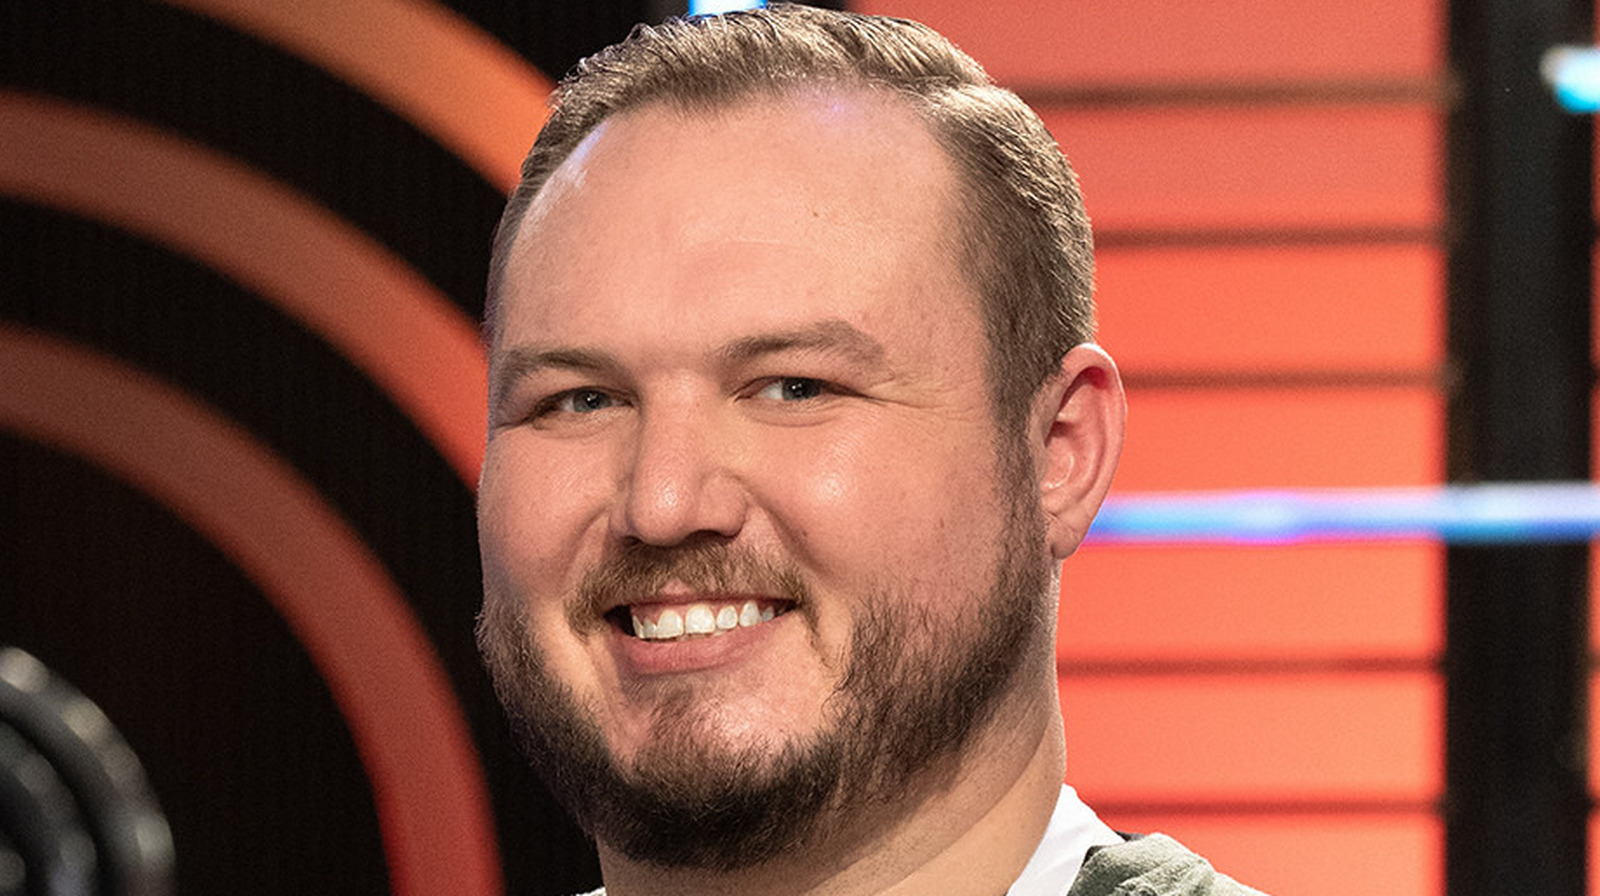 MasterChef Grant Gillon Wins Season 13 With A Mix Of Midwest And Italian Flavors – Exclusive